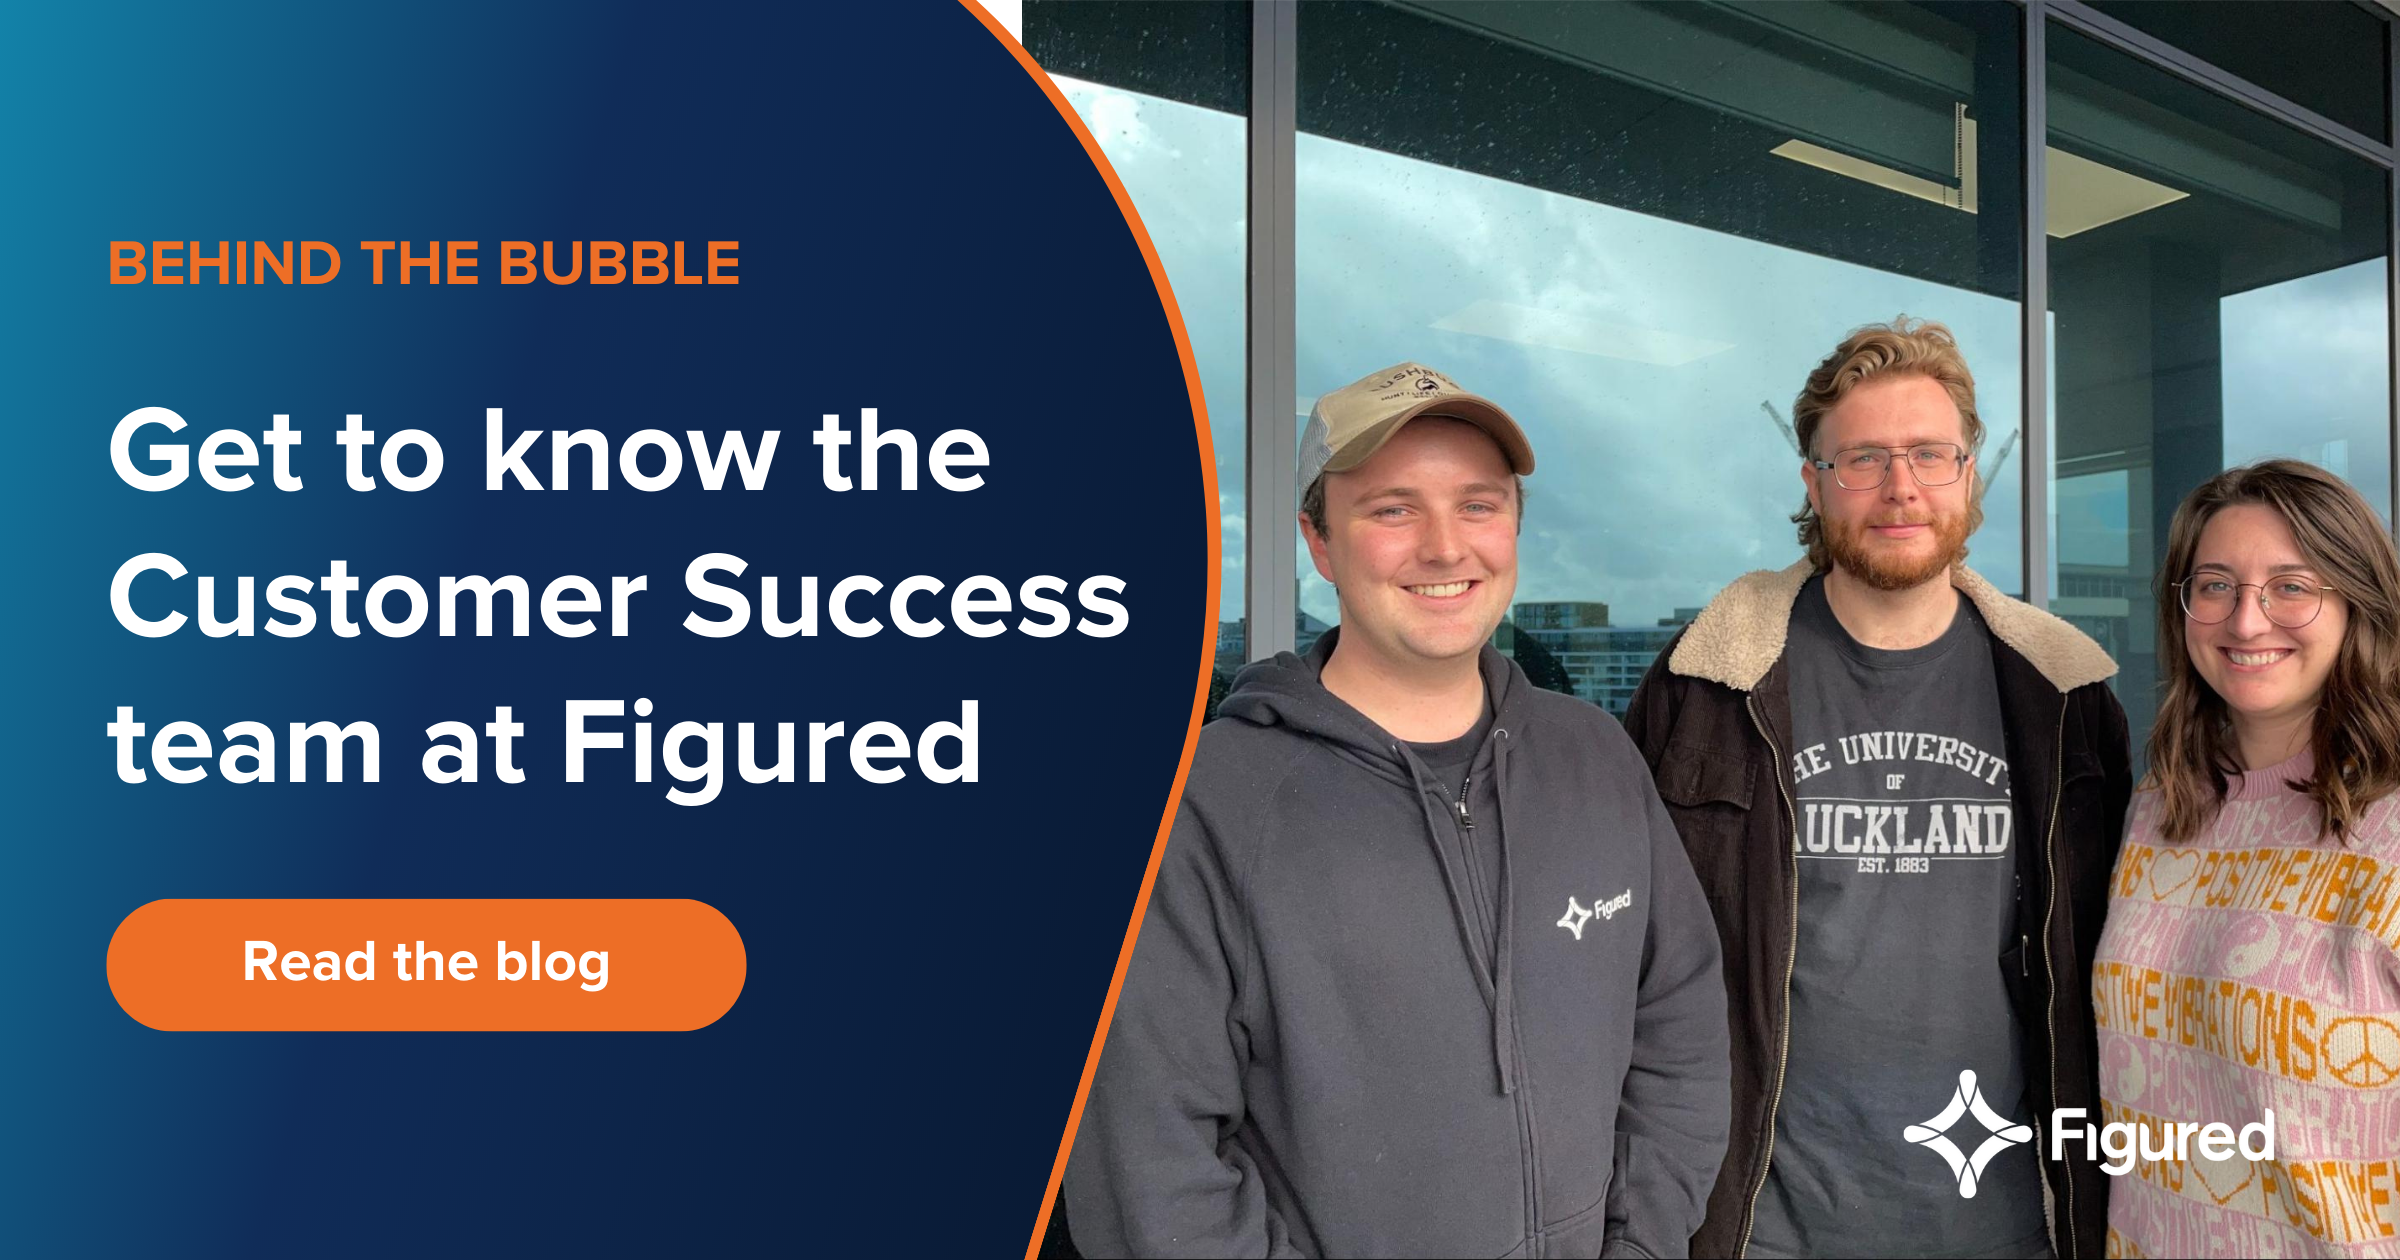 Behind the bubble: Get to know the customer success team at Figured